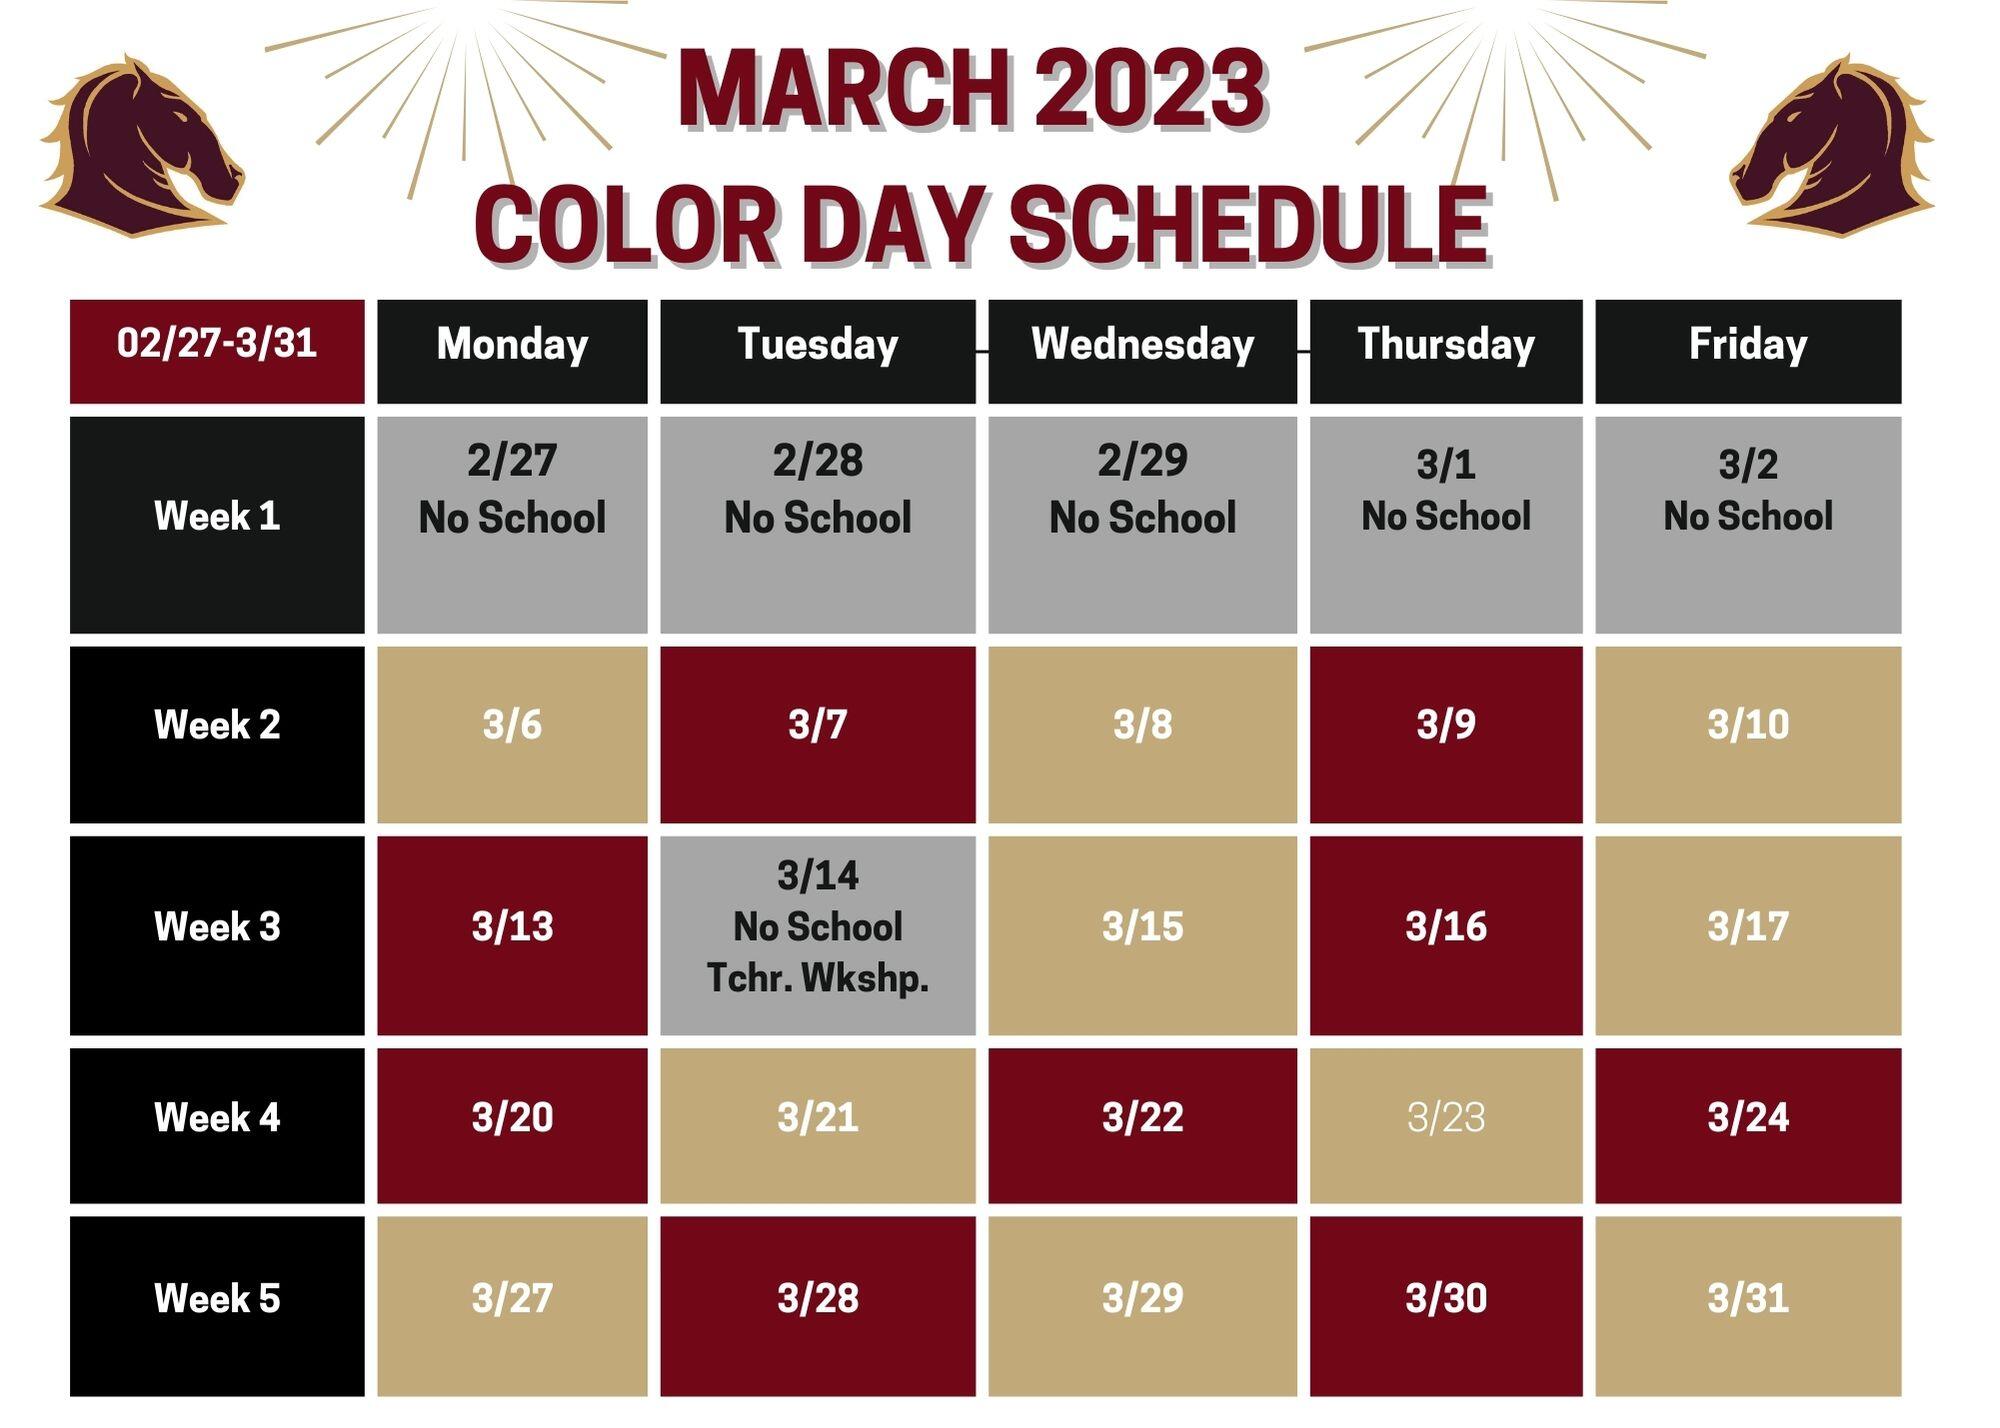 January 2023 Color Day Calendar, Alternating maroon and gold days with 10/3 being maroon and alternating from that date. No school 10/10 so the alternating colors skip that day and continue on.